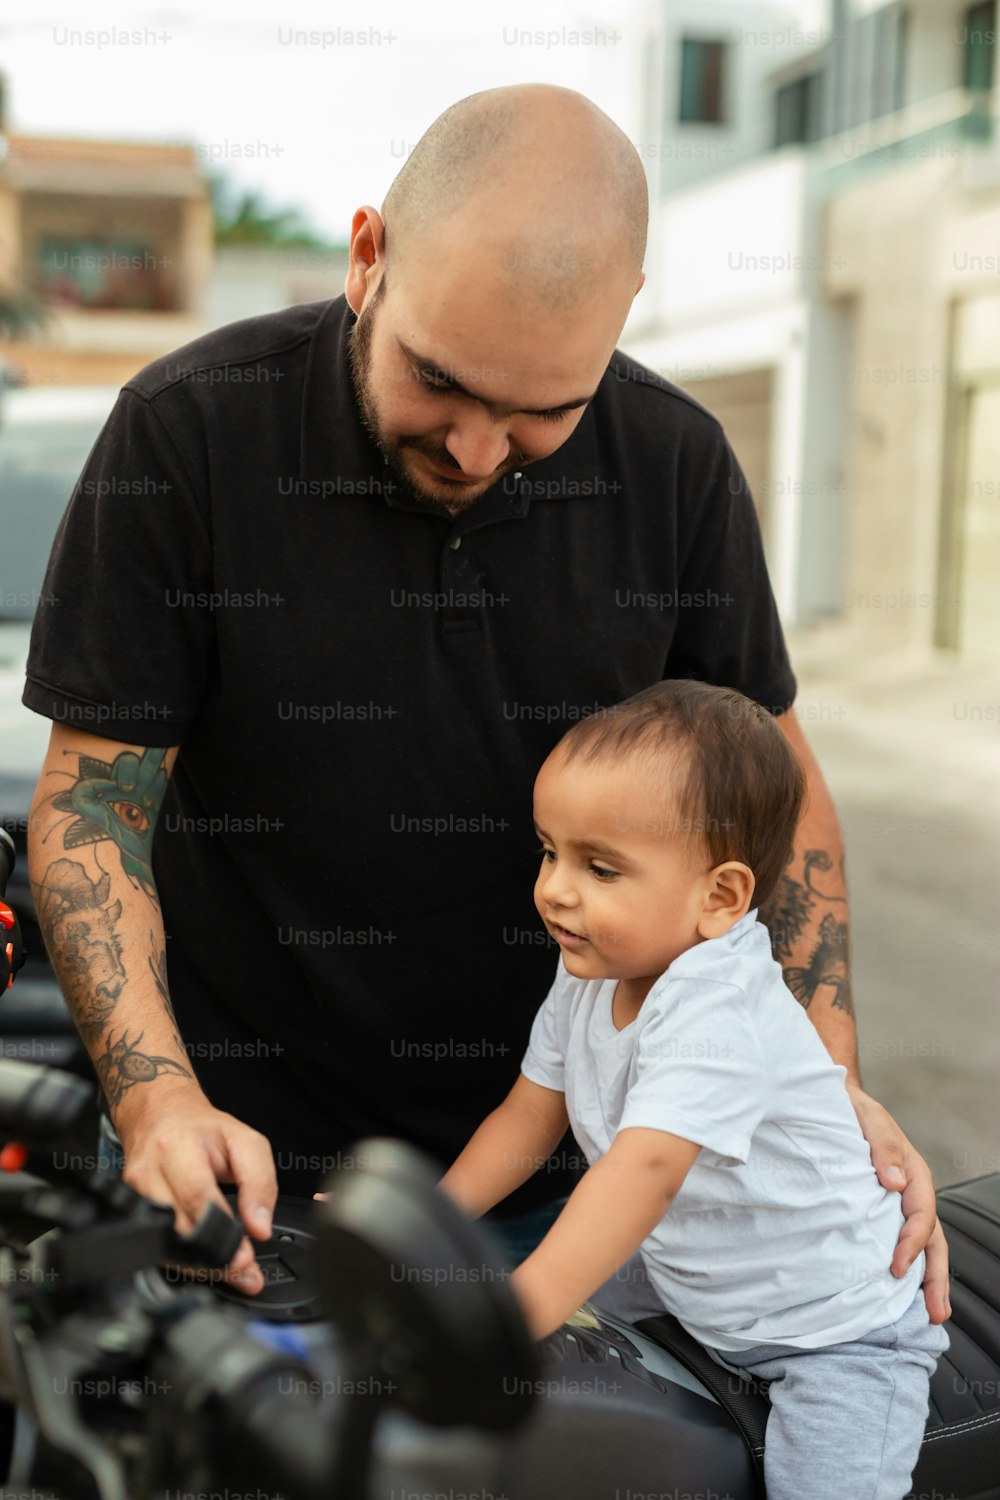 a man with a bald head and a small child on a motorcycle